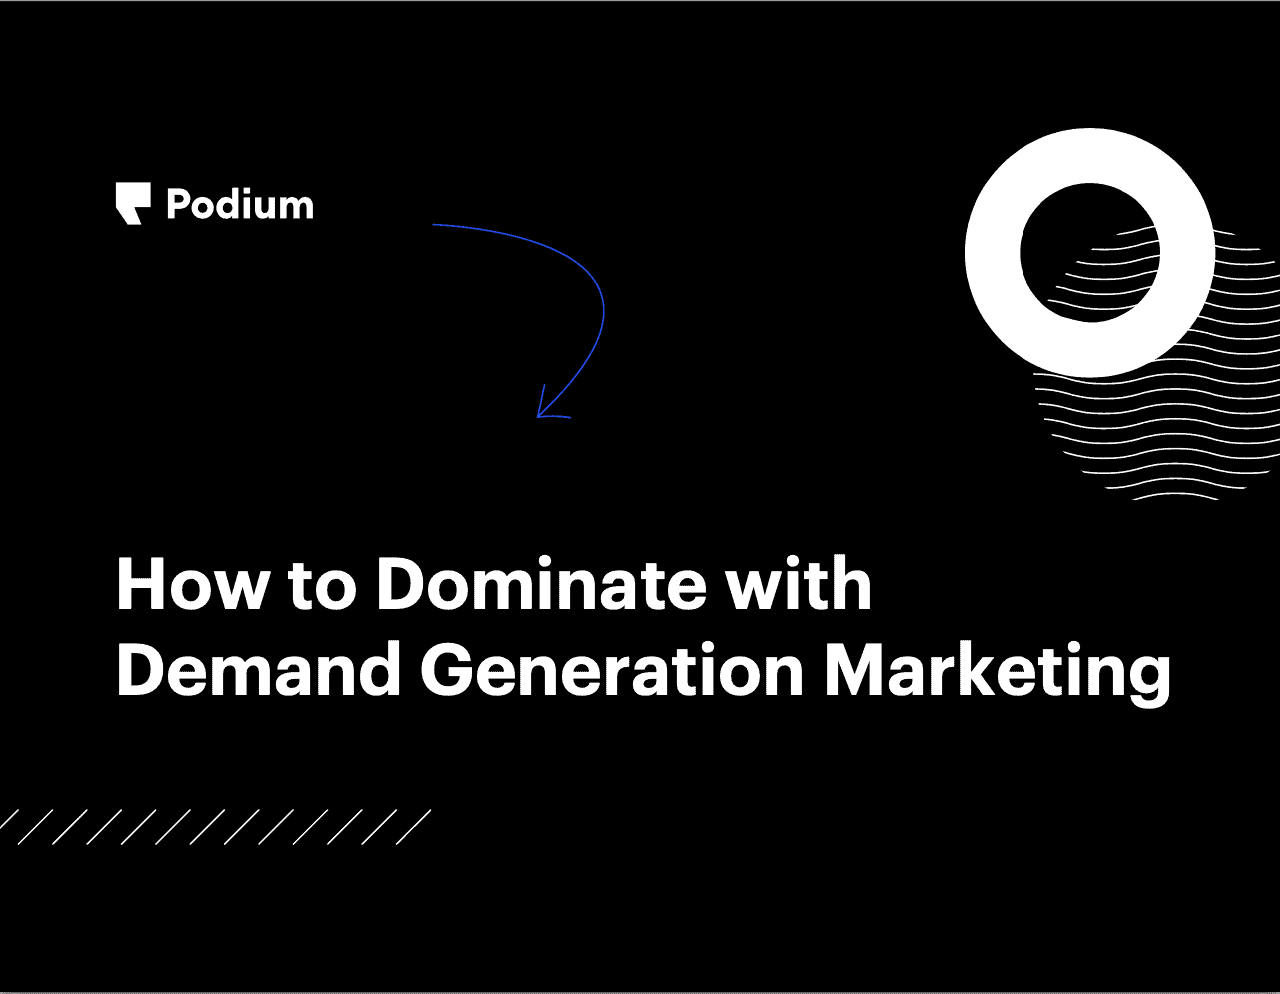 How to Dominate with Demand Generation Marketing